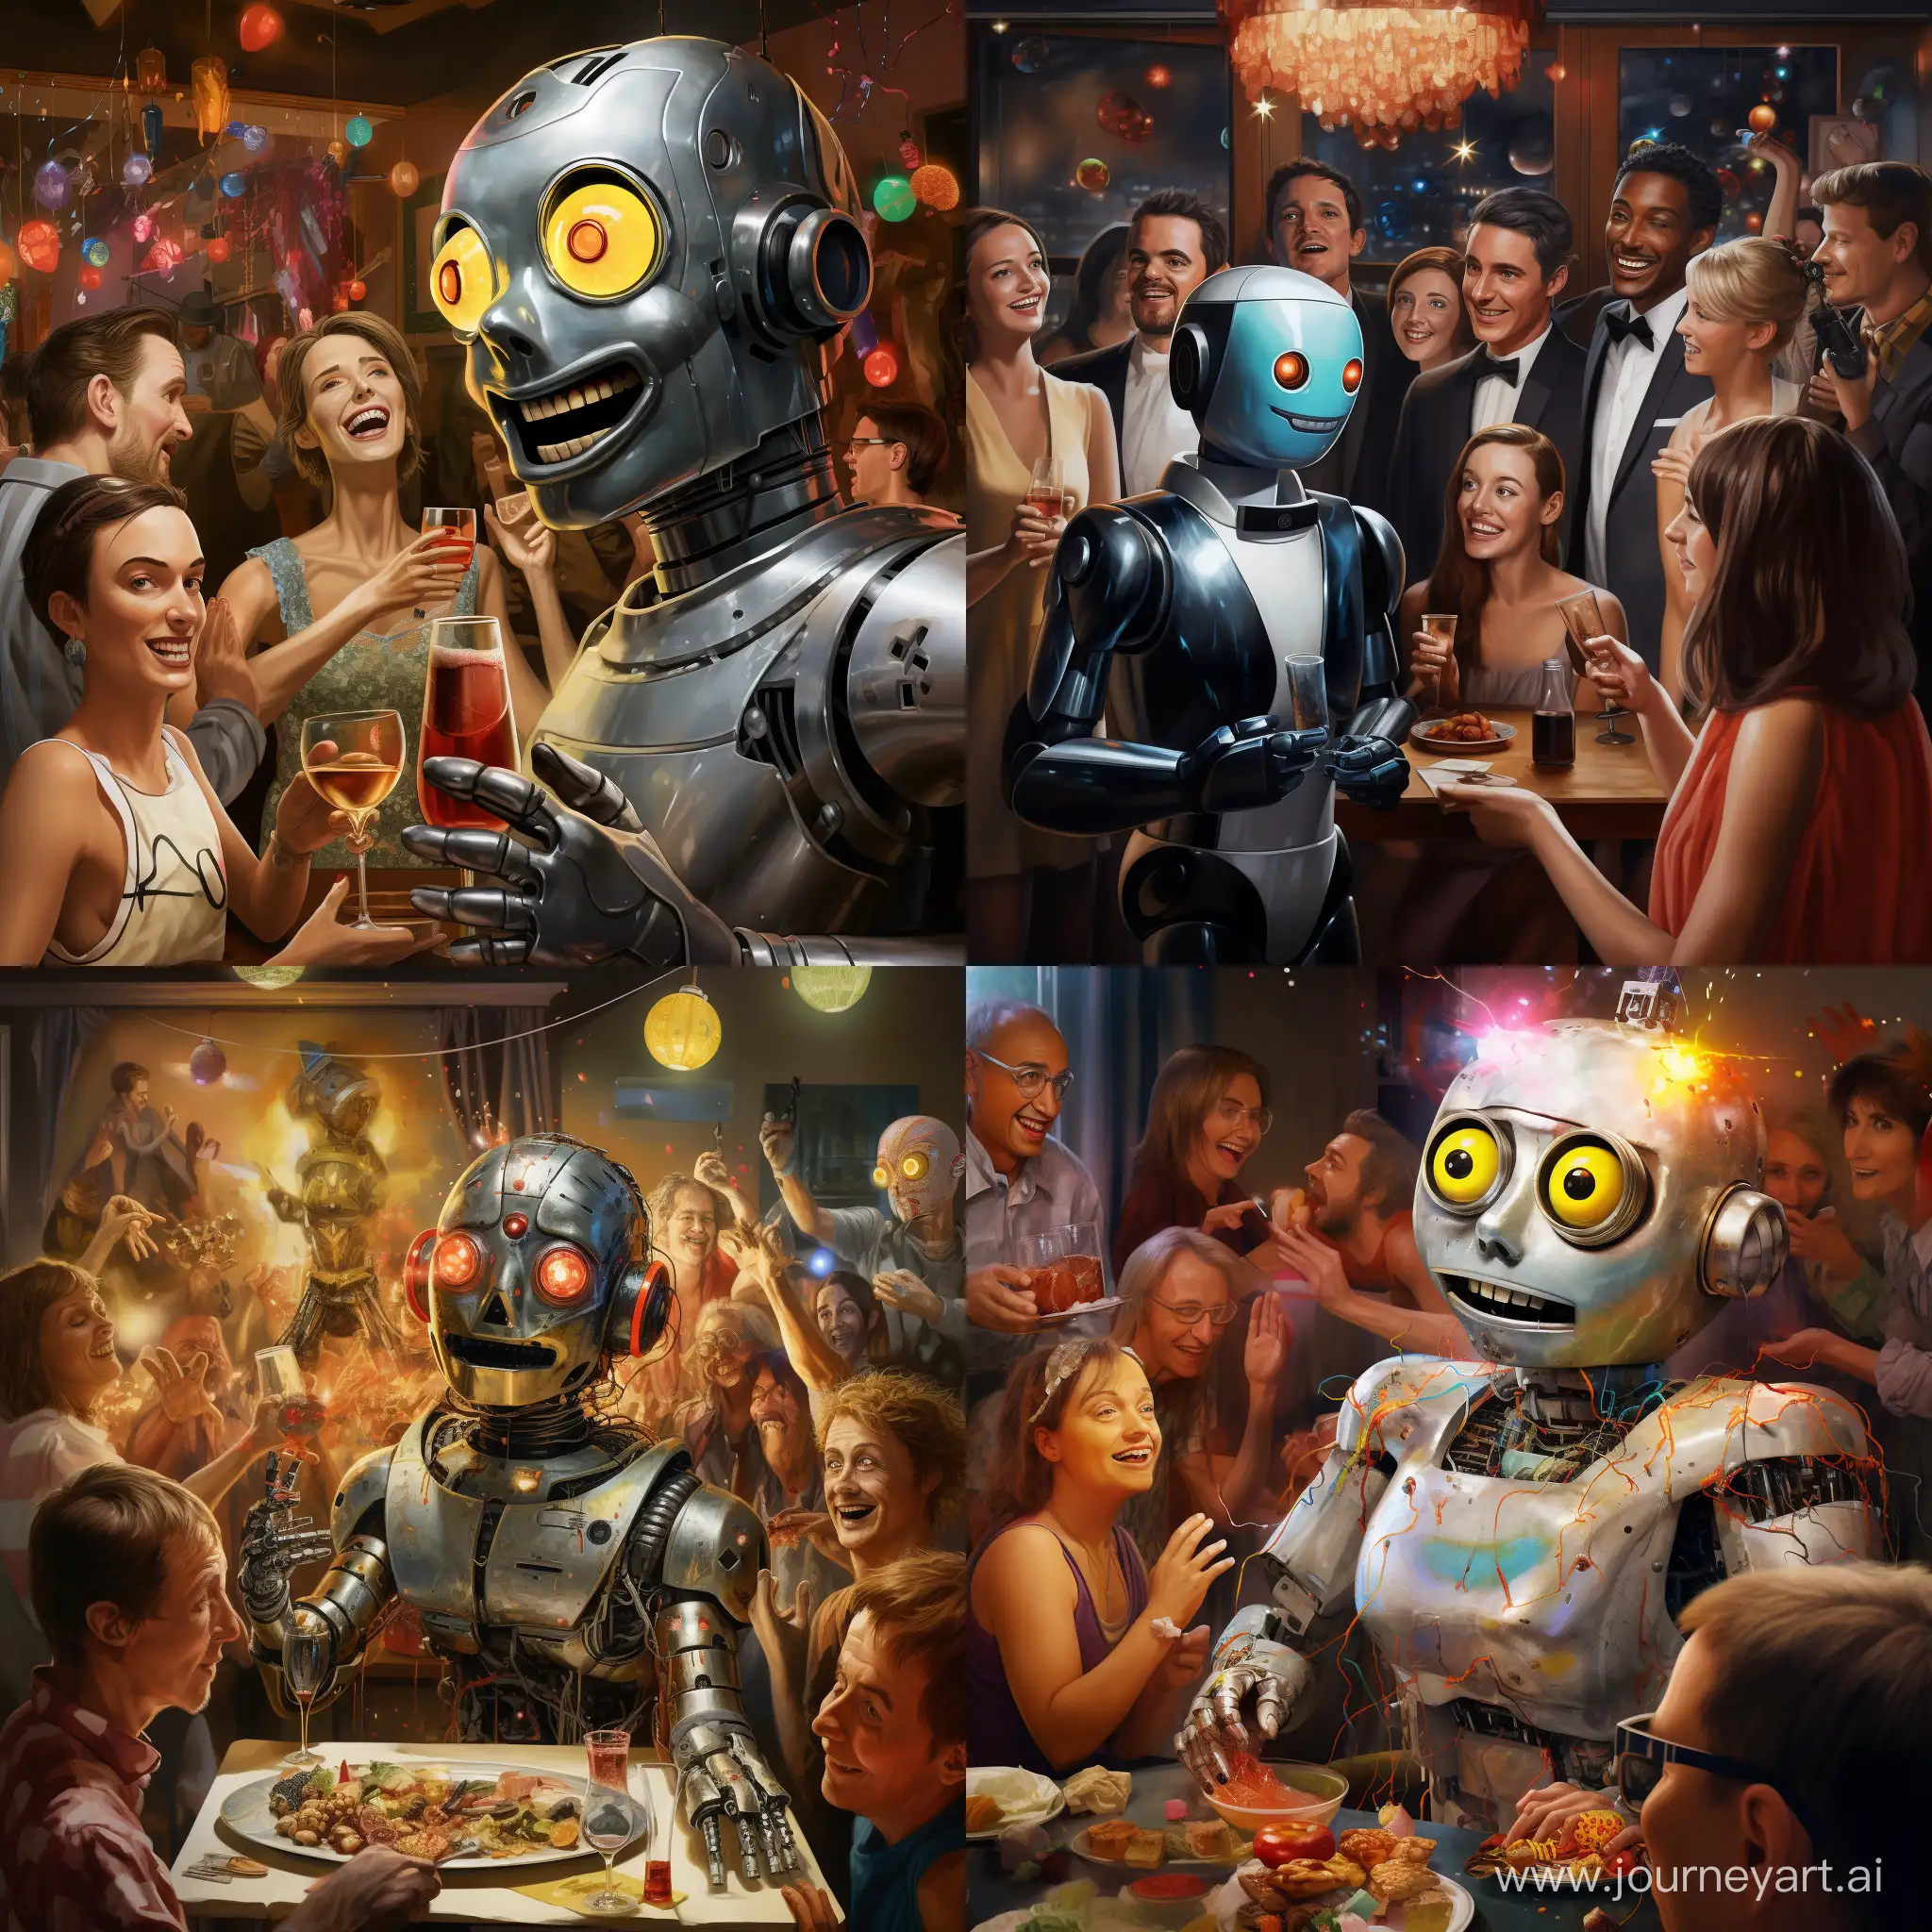 Futuristic-Robot-Delighting-Guests-at-a-Vibrant-2042-Party